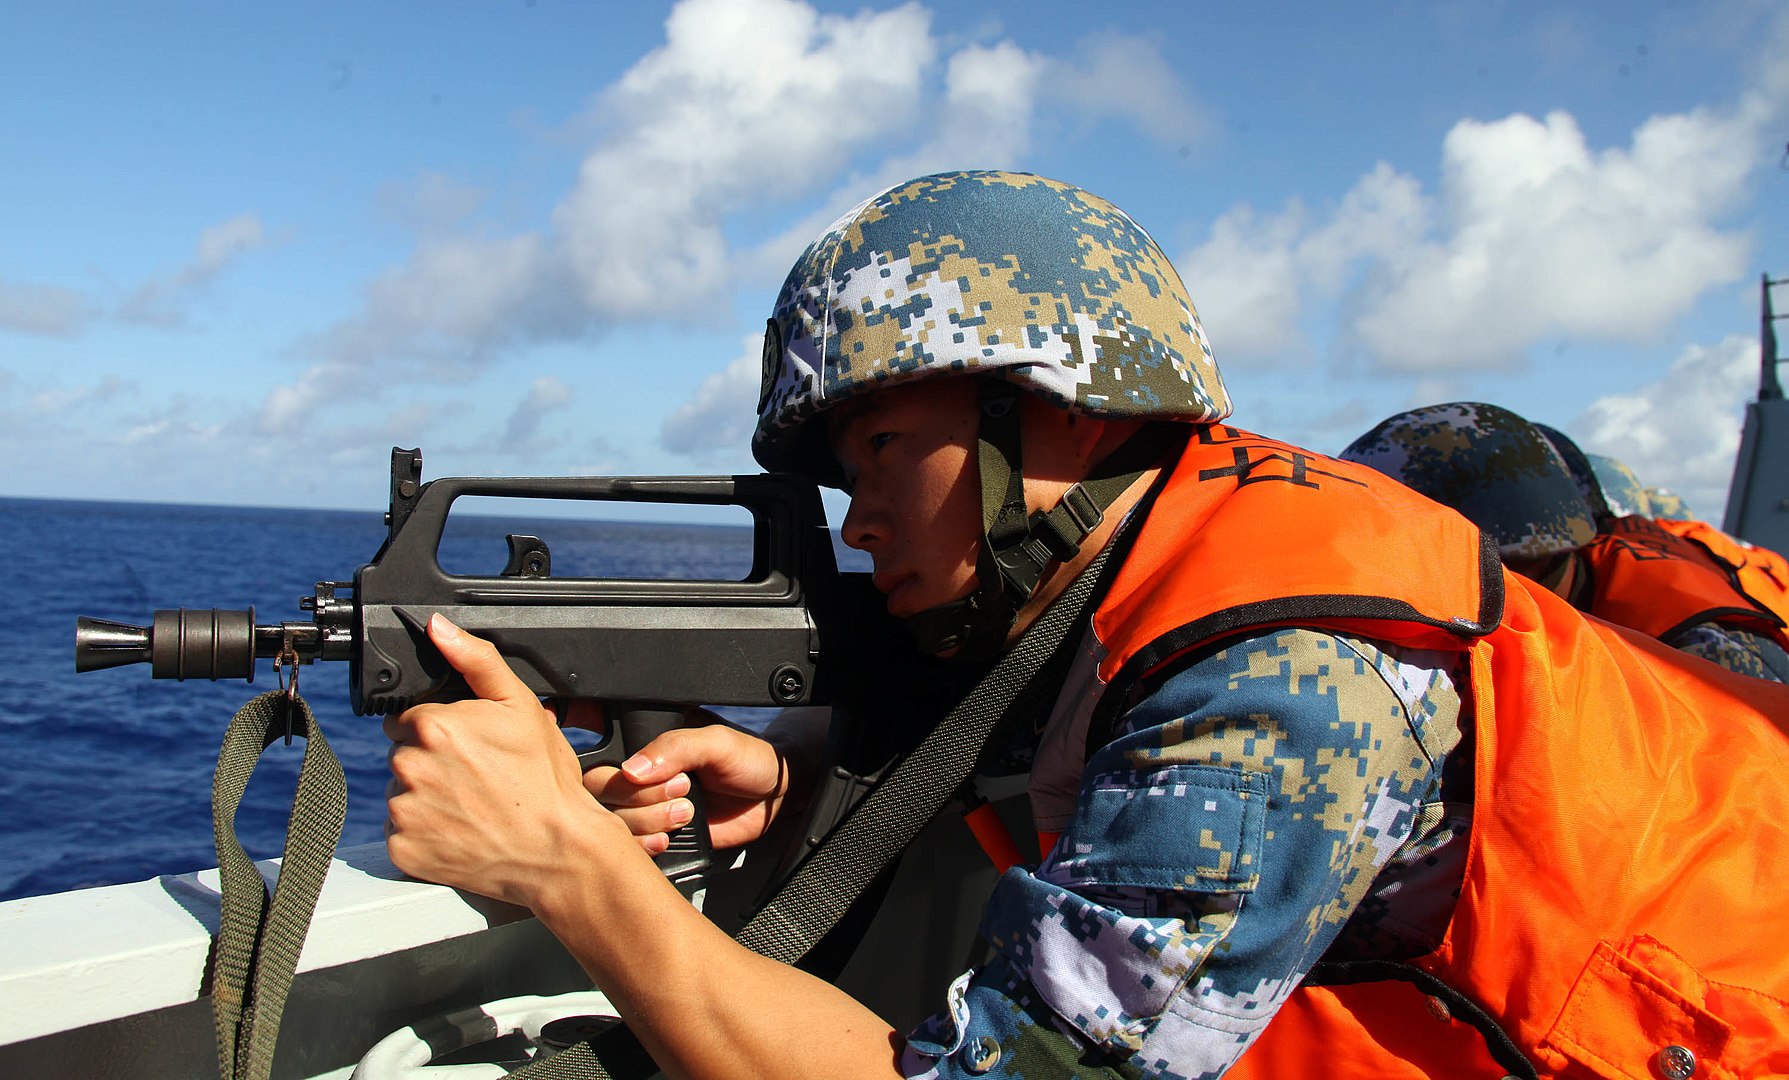 China's QBZ-95-1 Assault Rifle Is Still the 'Queen of Battle